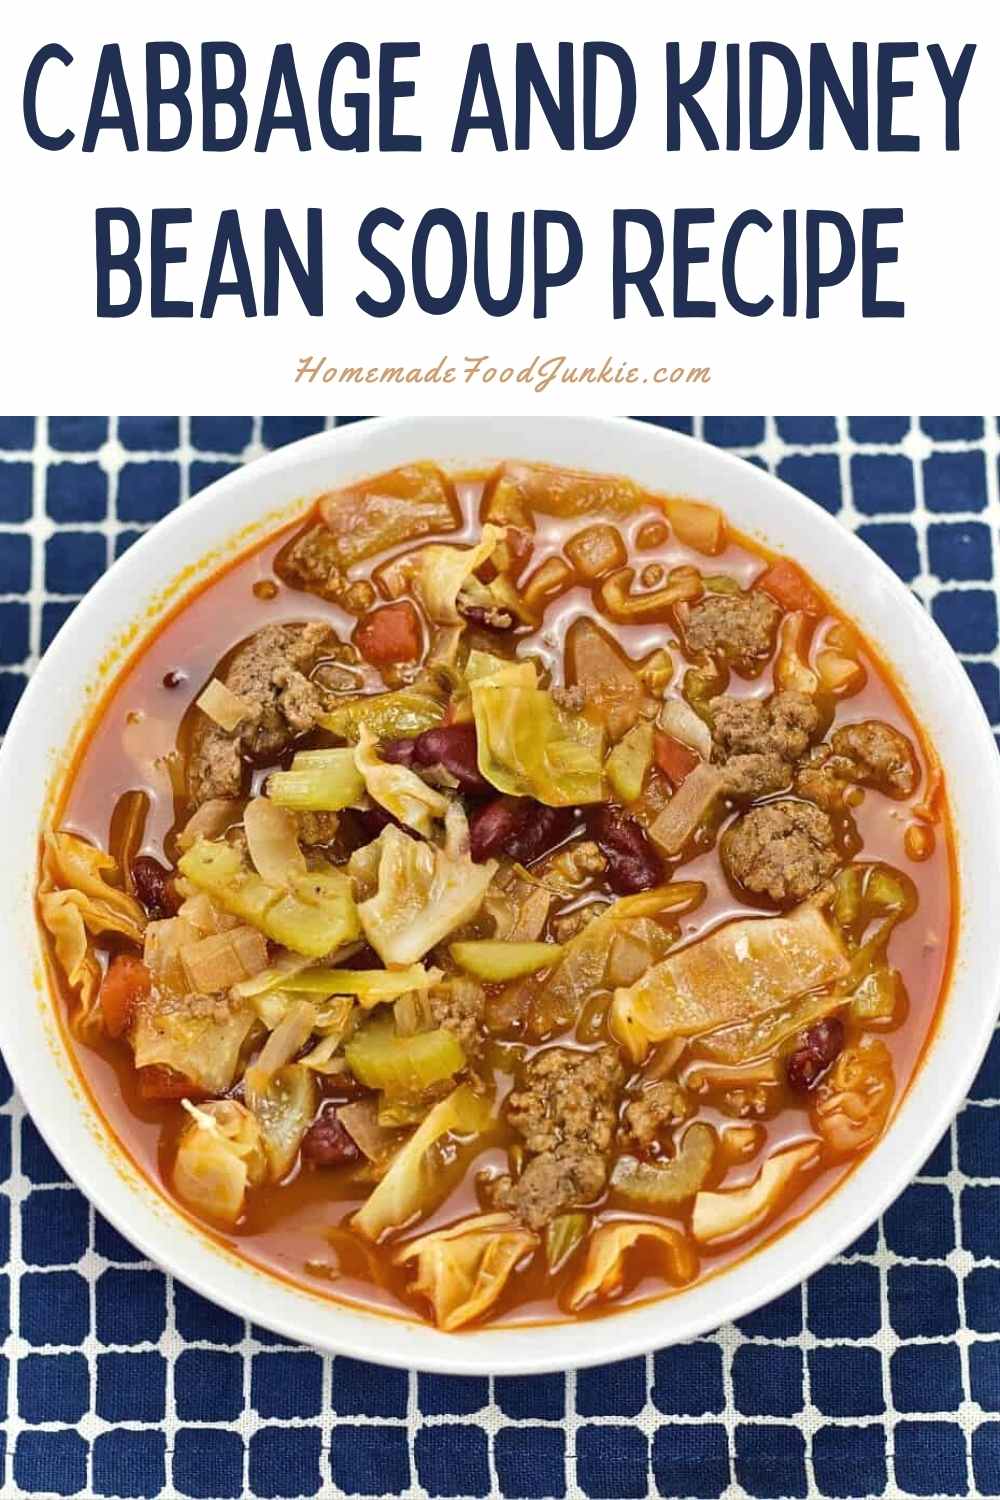 Cabbage And Kidney Bean Soup Recipe-Pin Image